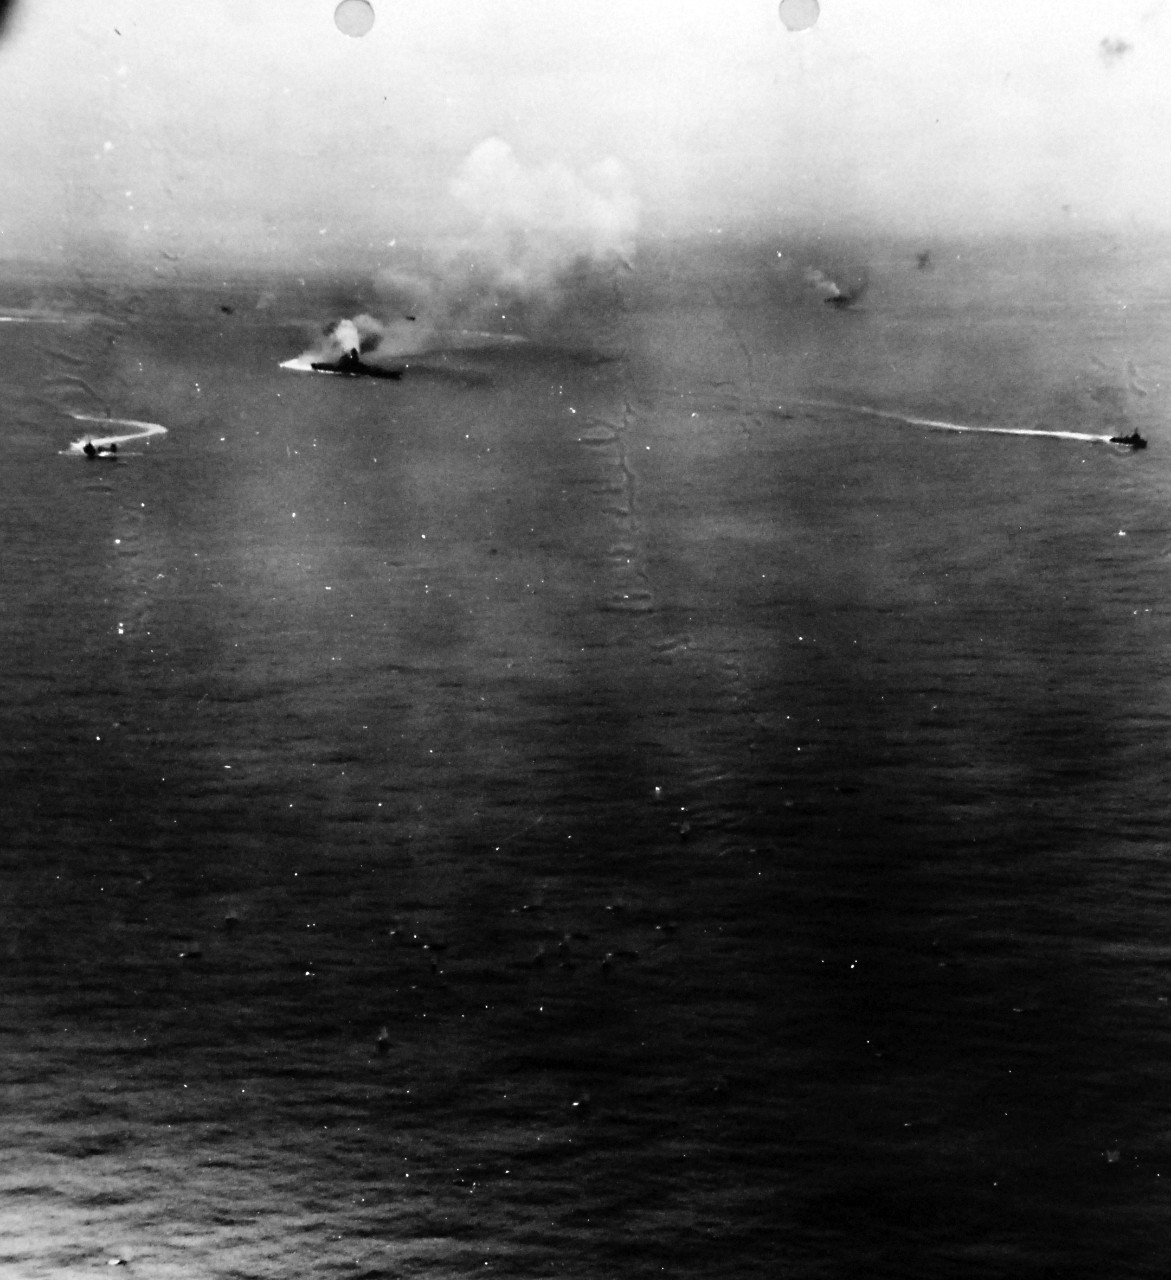 80-G-320641:   Operation Ten-Go,  Japanese battleship Yamato, April  7, 1945.  Japanese battleship Yamato blows up after receiving massive bomb and torpedo damage from U.S. Navy carrier planes, north of Okinawa.   Three Japanese destroyers are nearby.  Photographed by planes from USS Hornet (CV-12).  Official U.S. Navy Photograph, now in the collections of the National Archives. (2016/07/05)